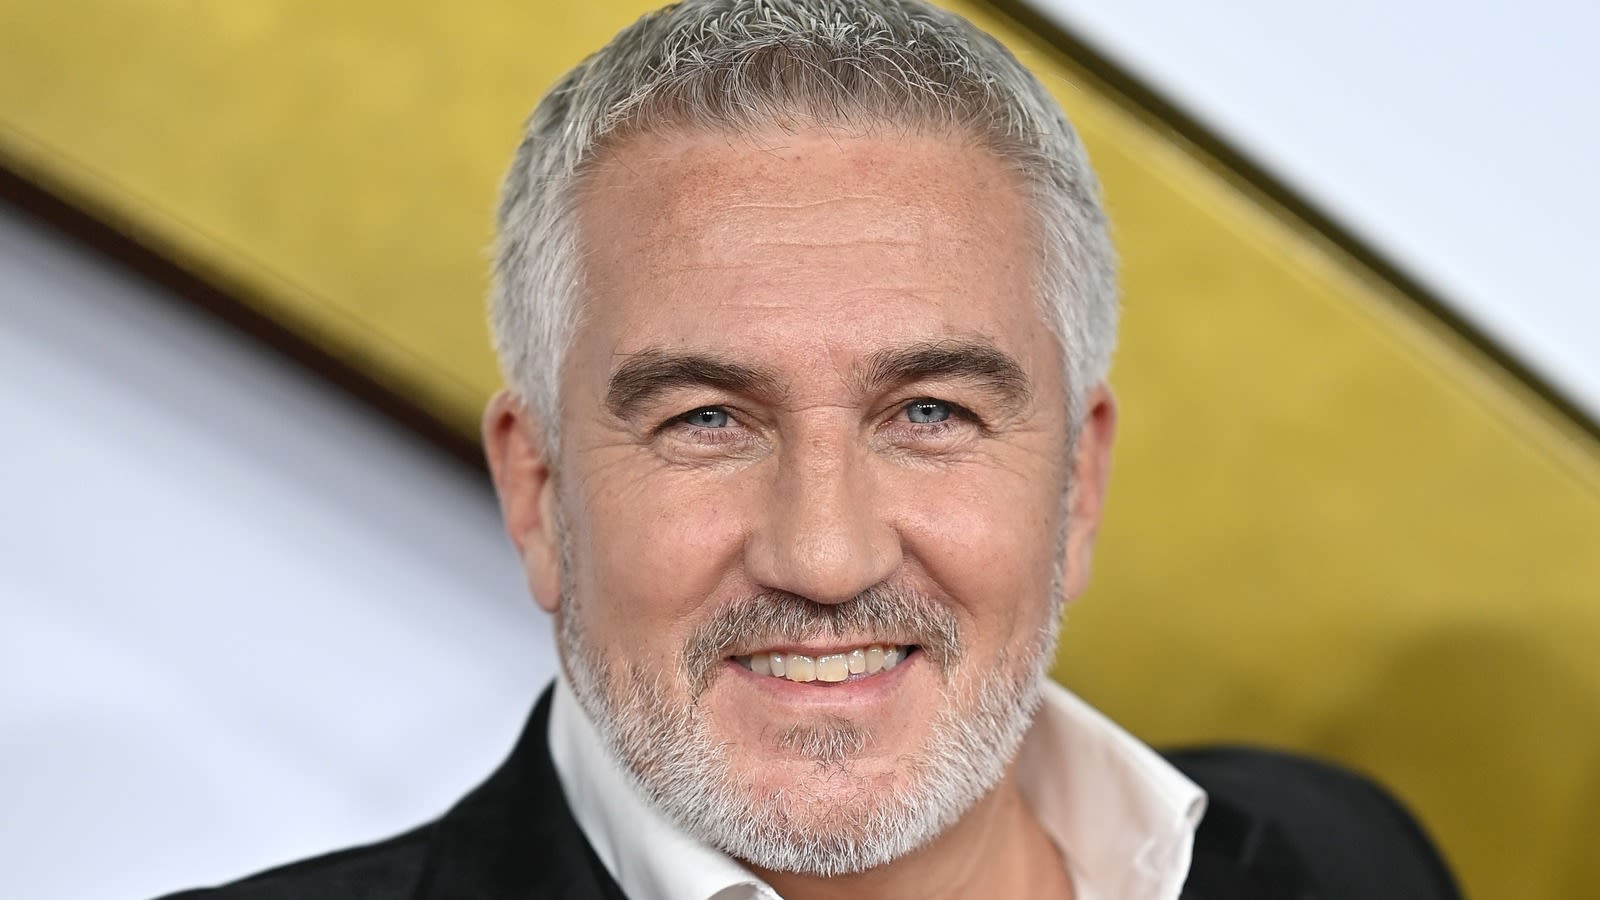 Tragic Details About Paul Hollywood